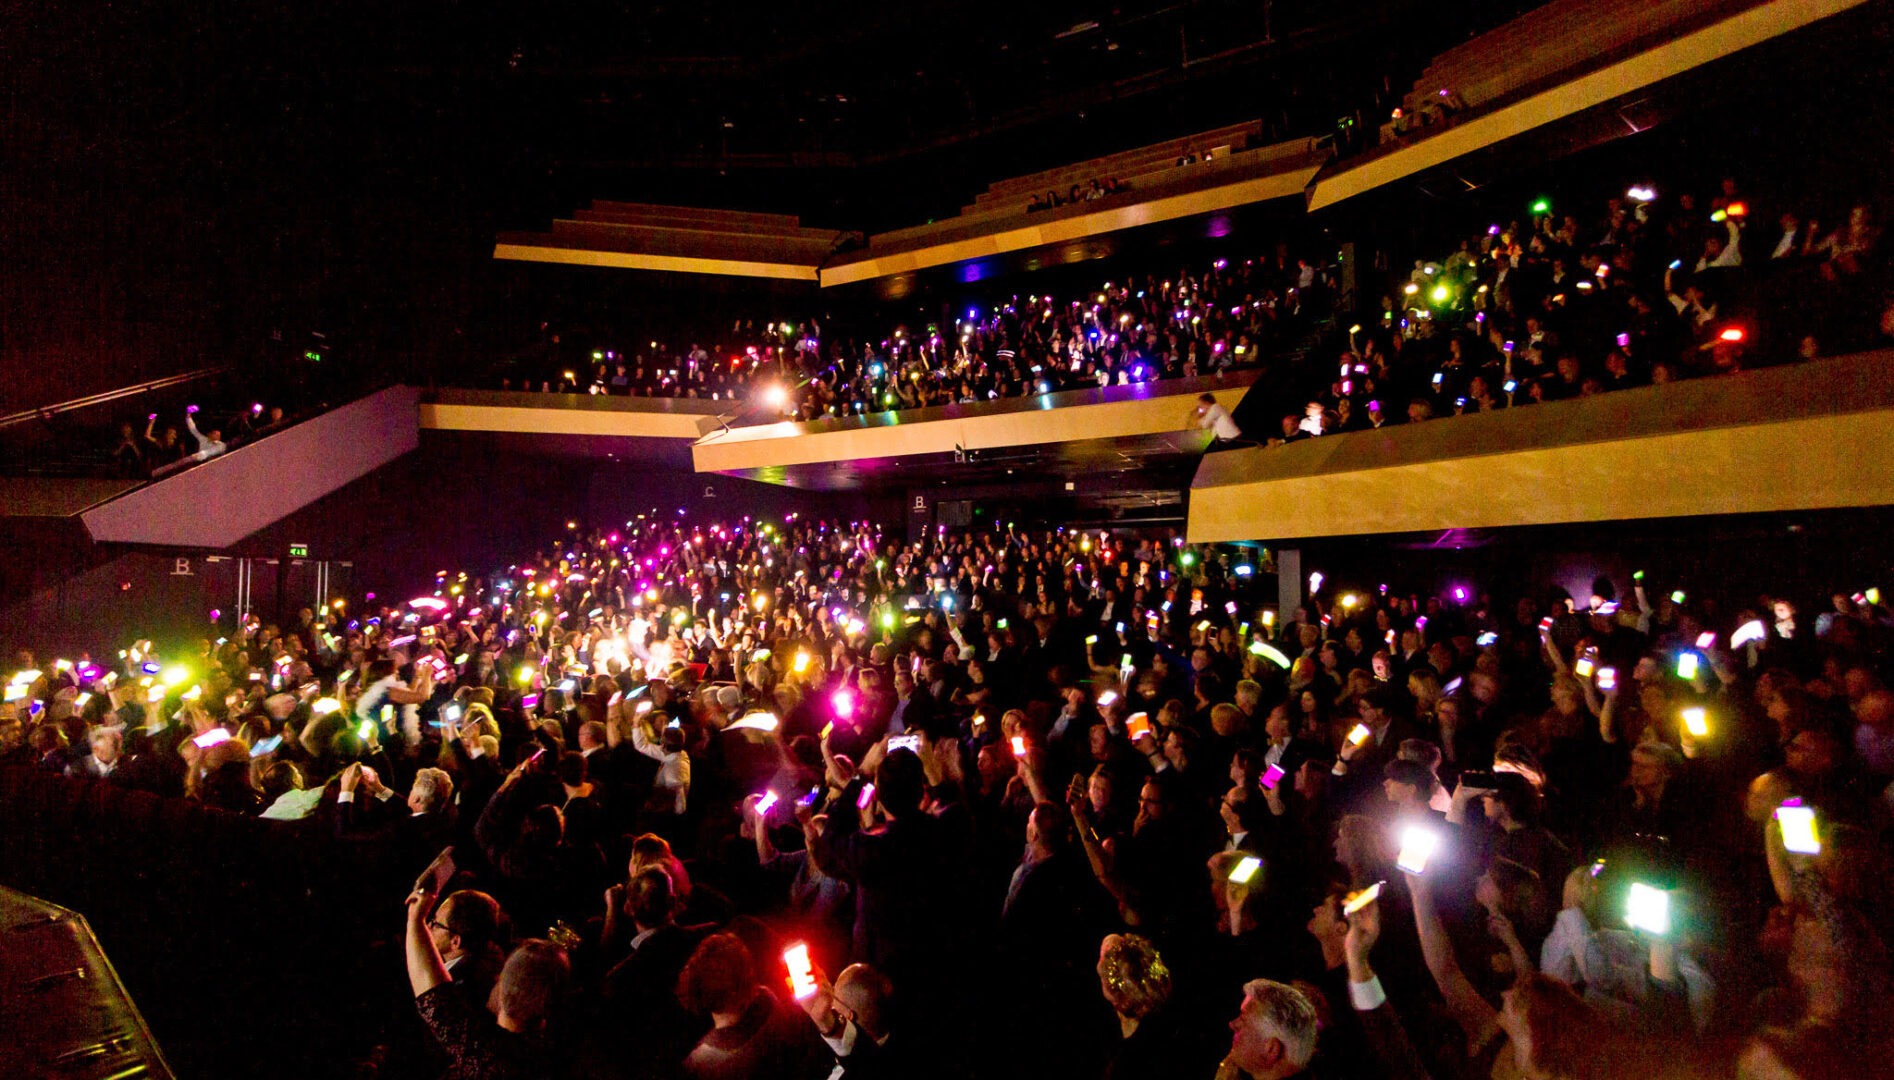 A dark auditorium with hundreds of people holding up their illuminated cellphones